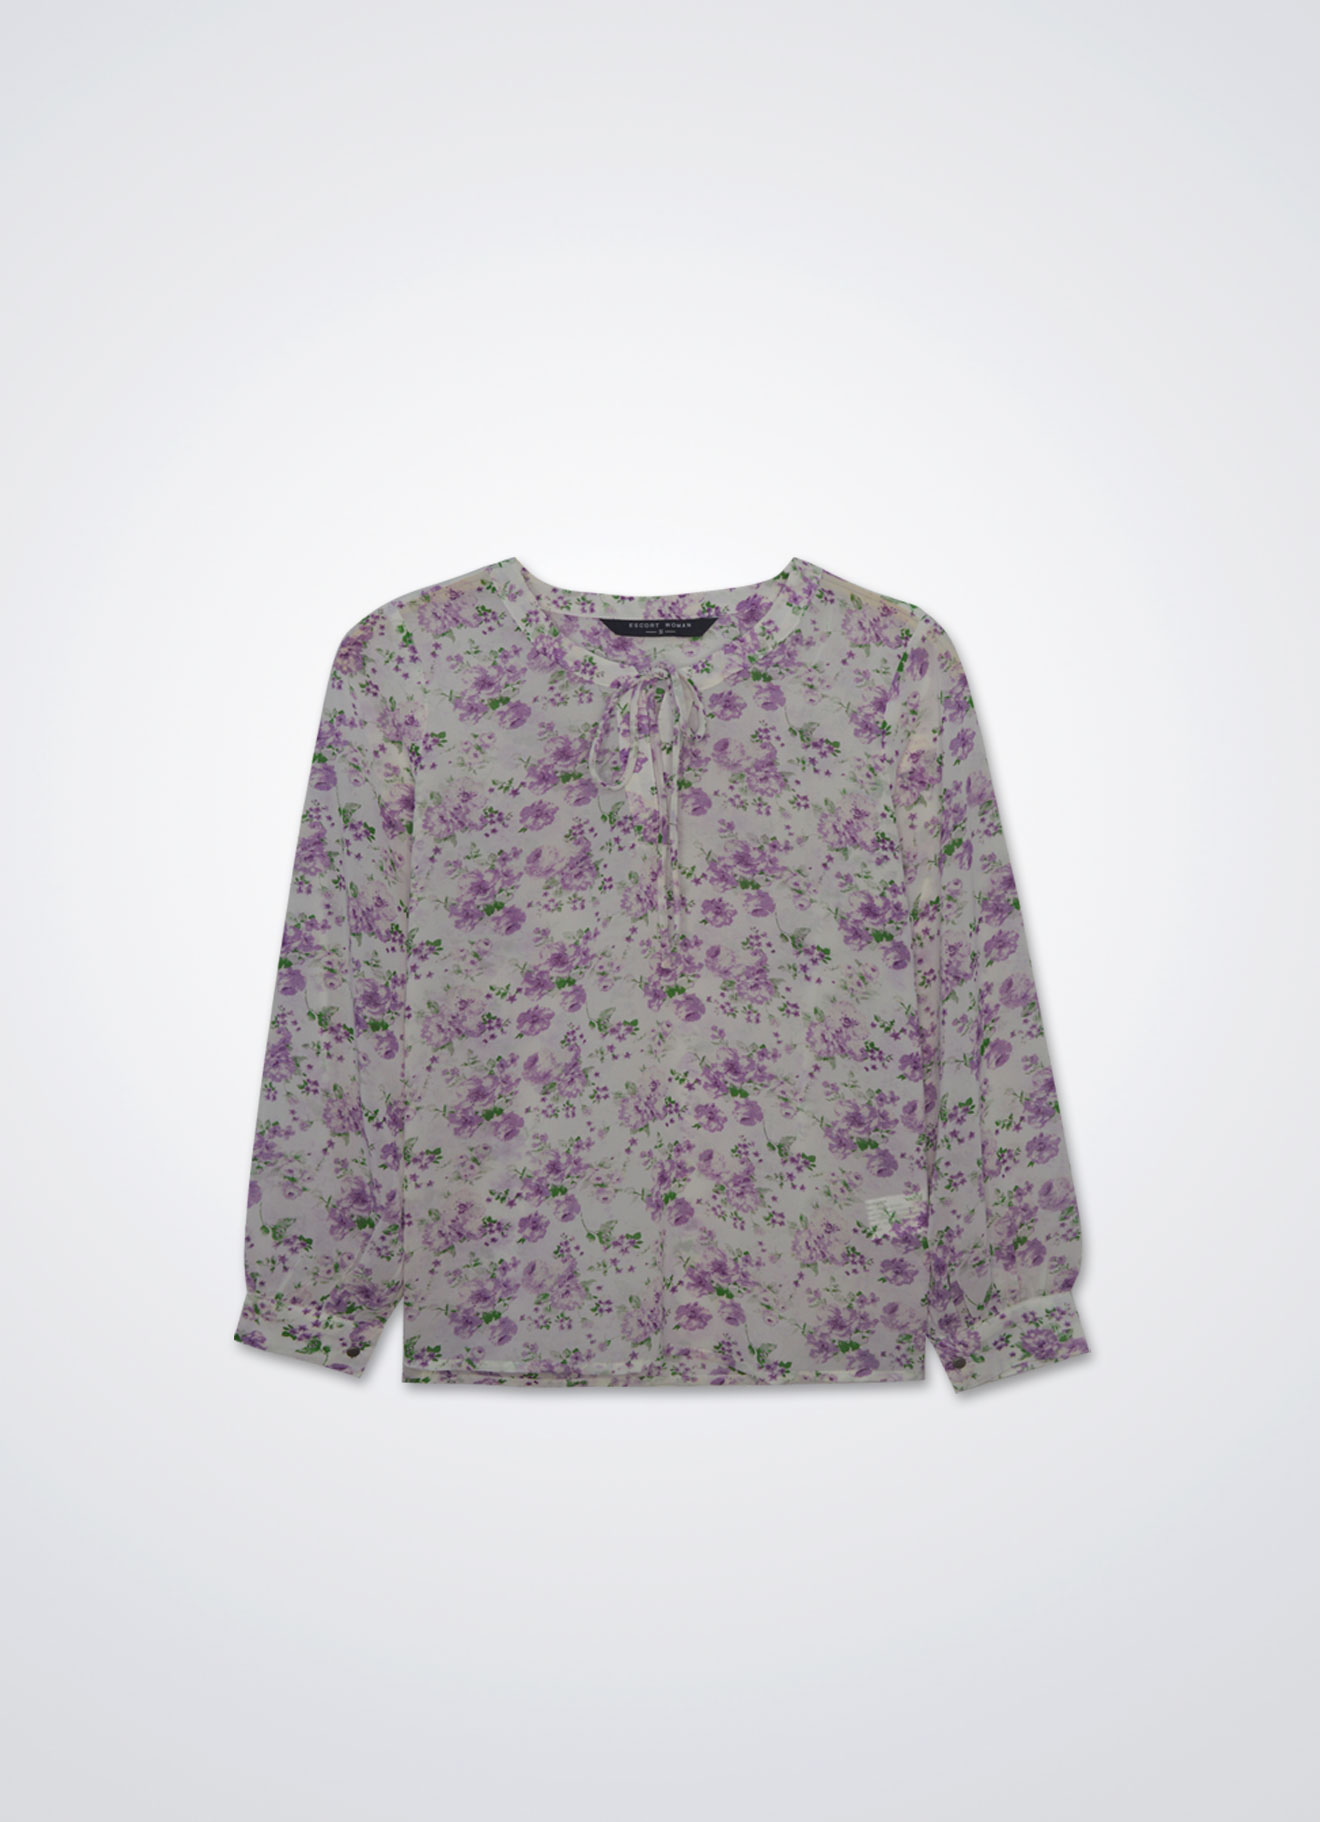 Lupine by Floral Printed Blouse